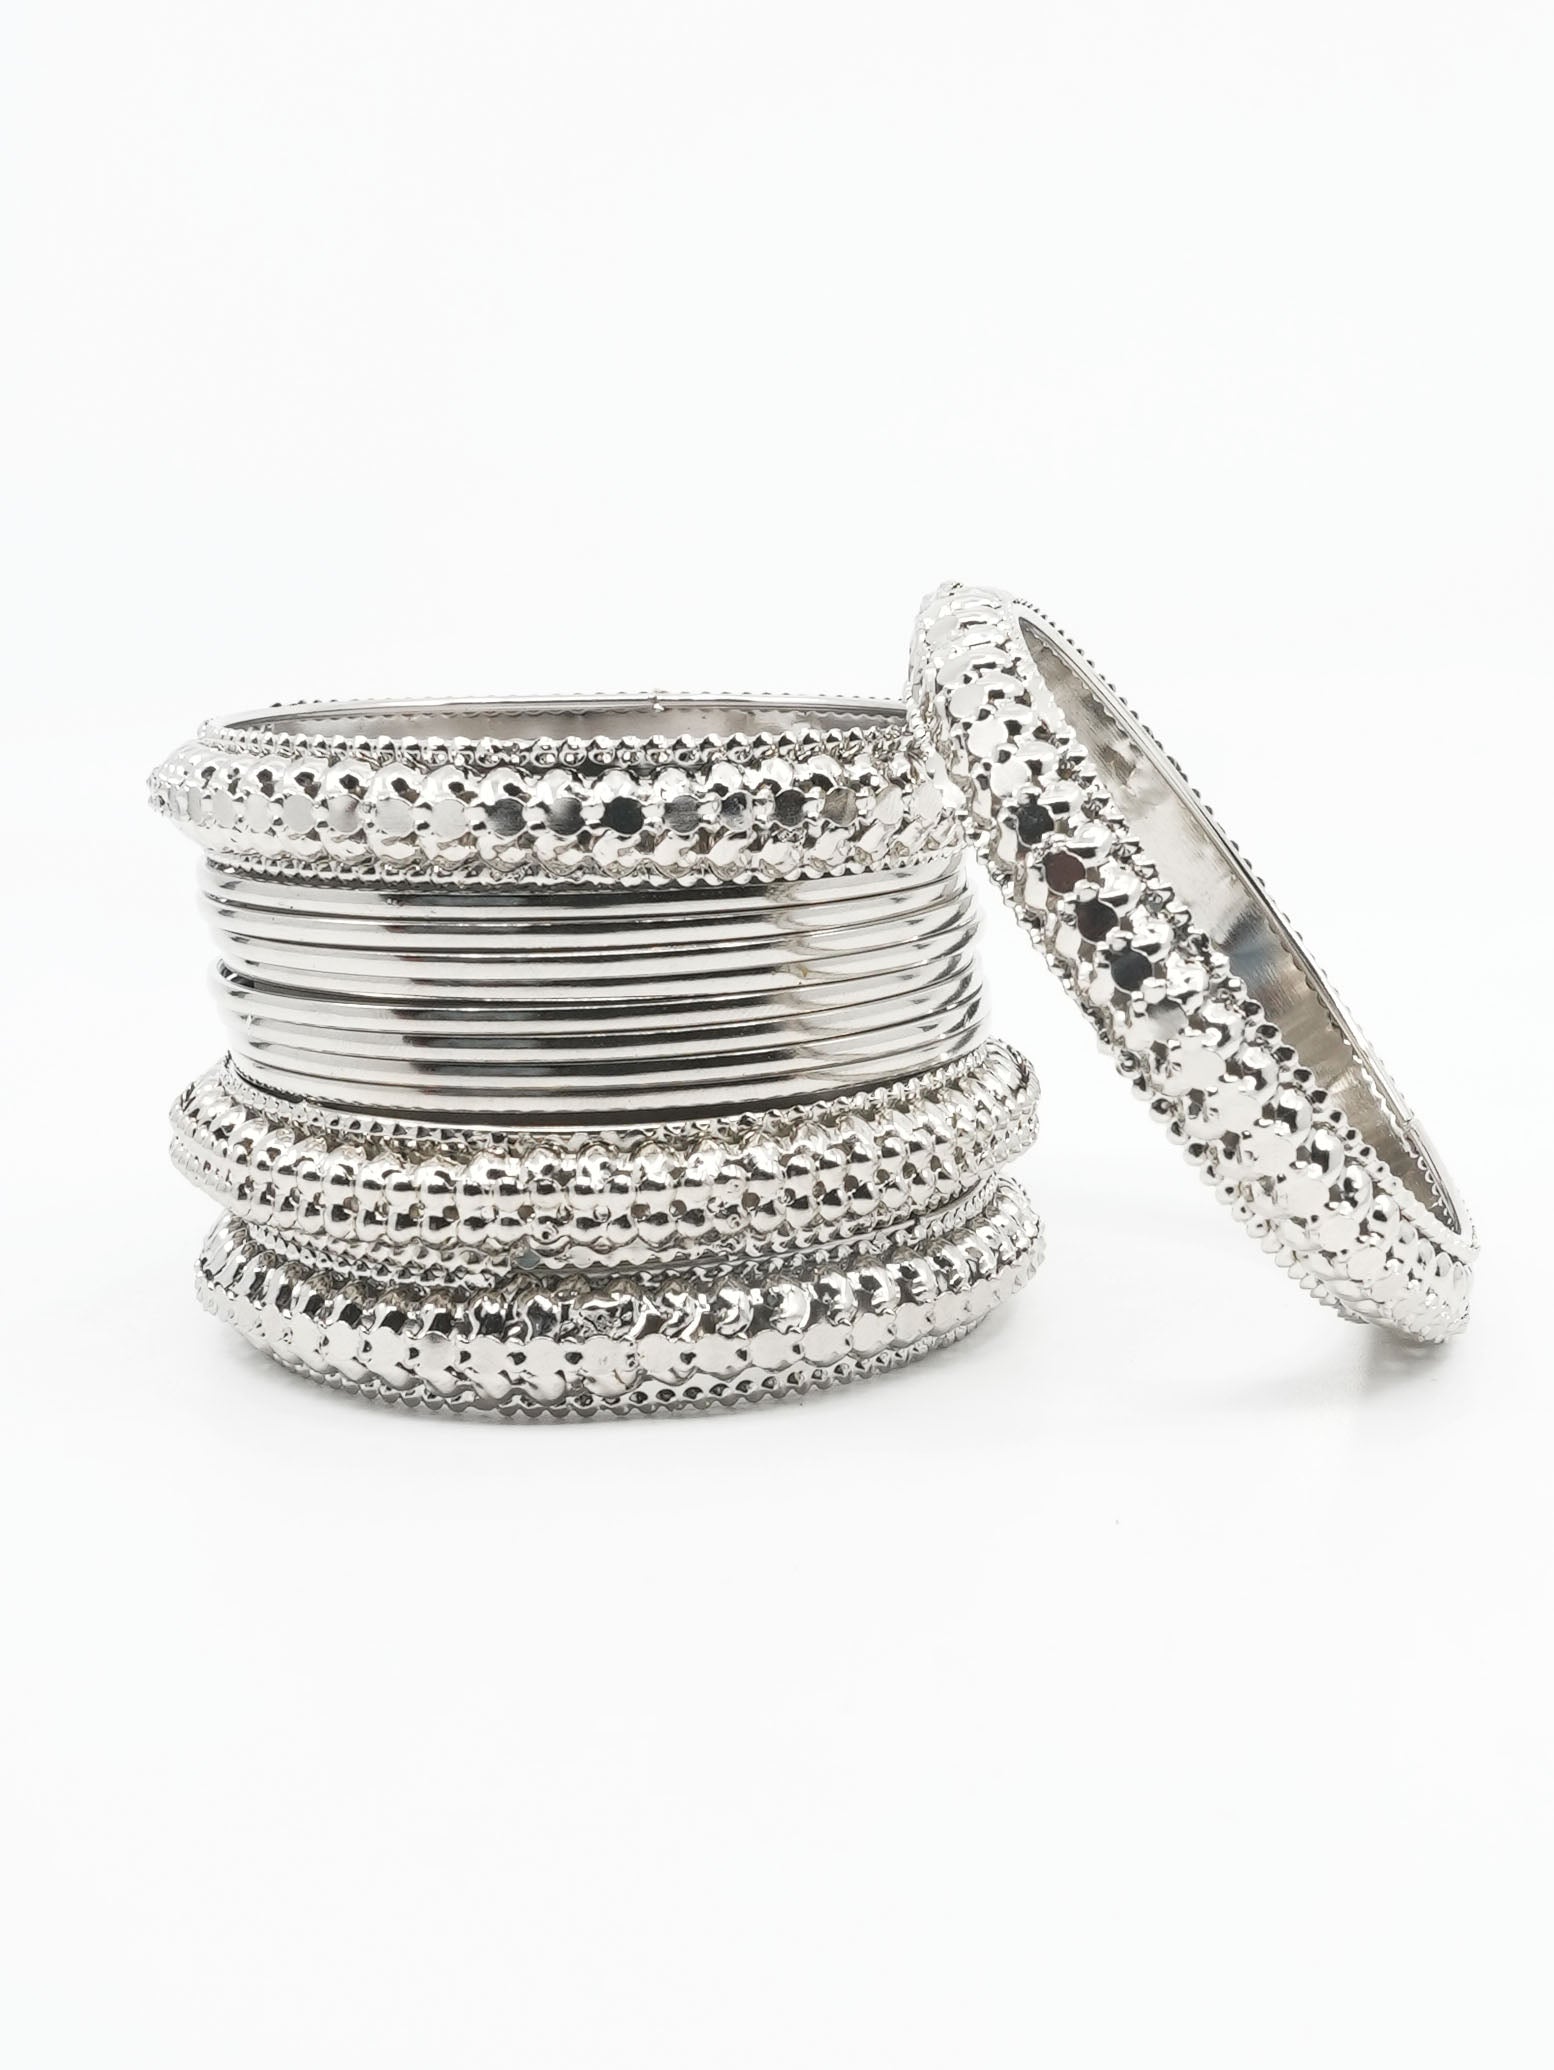 Fancy Silver Plated Bangles Set of 12 bangles 11446K